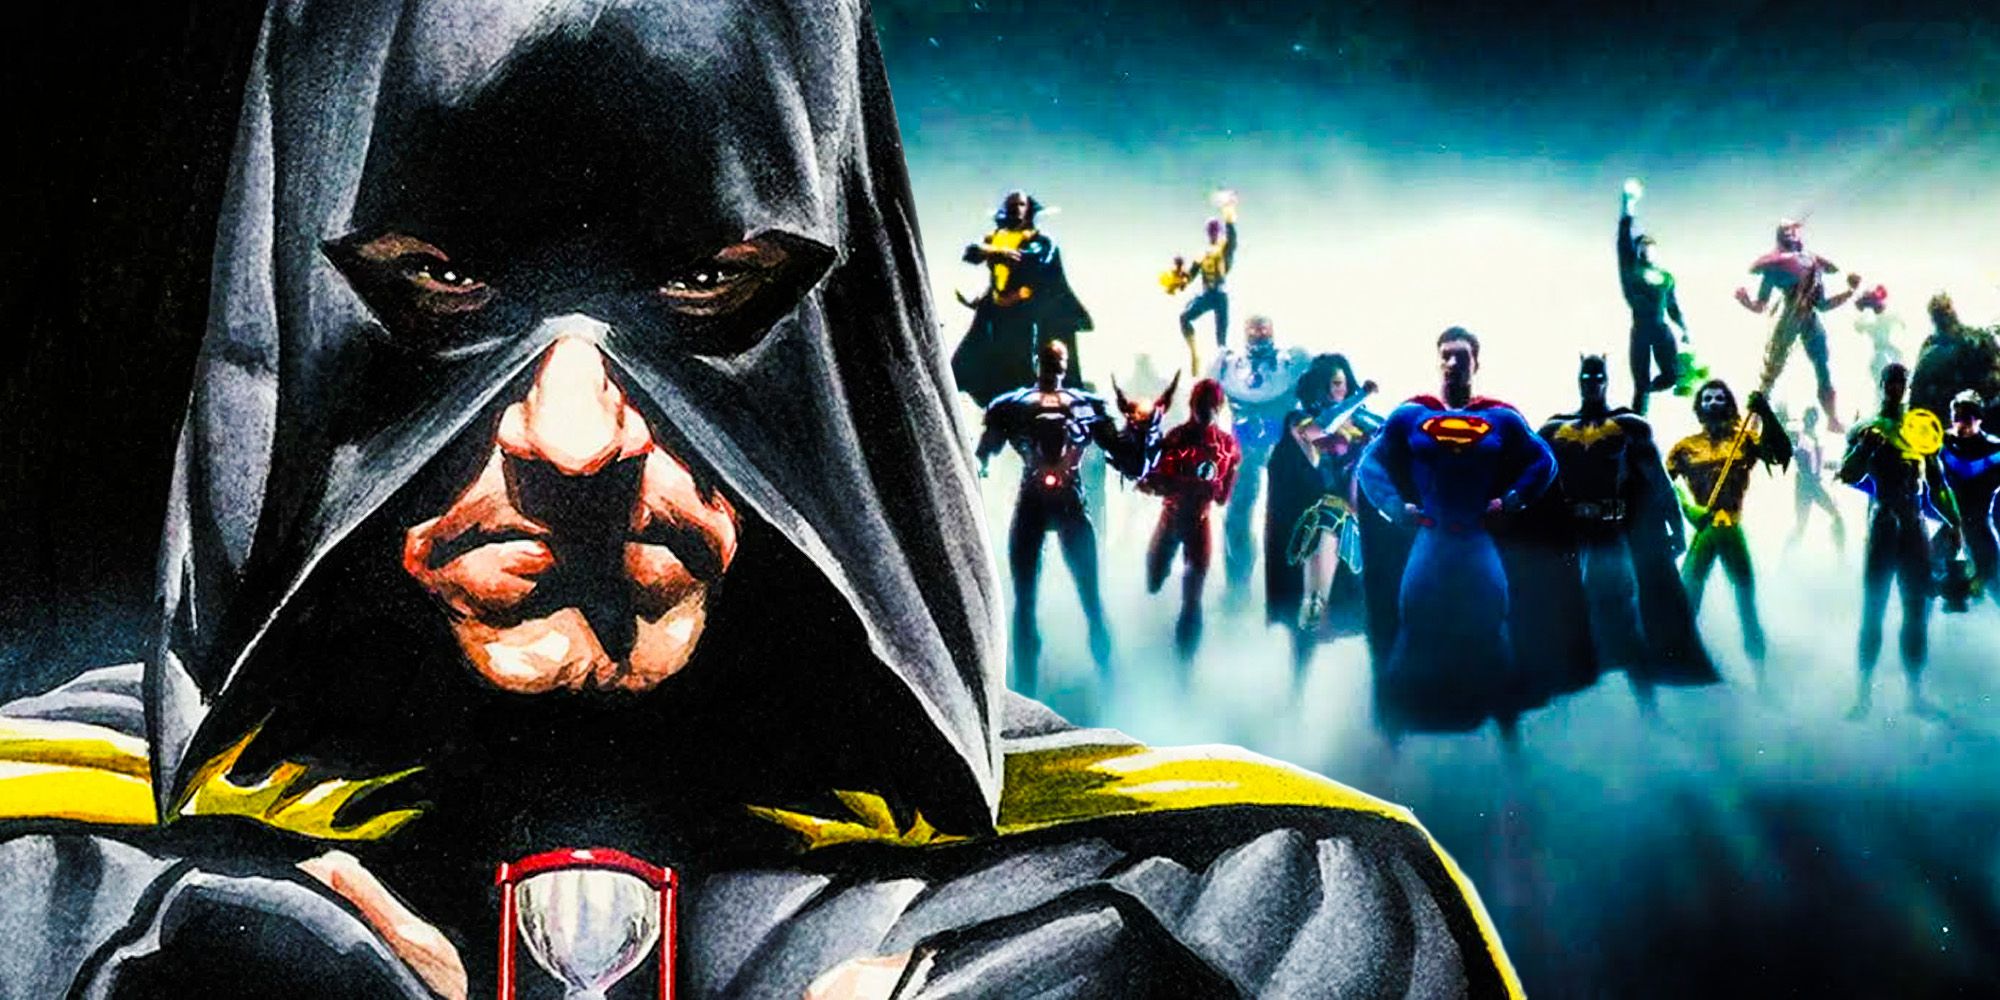 Hourman Movie: Release Date, Story Details & Cast